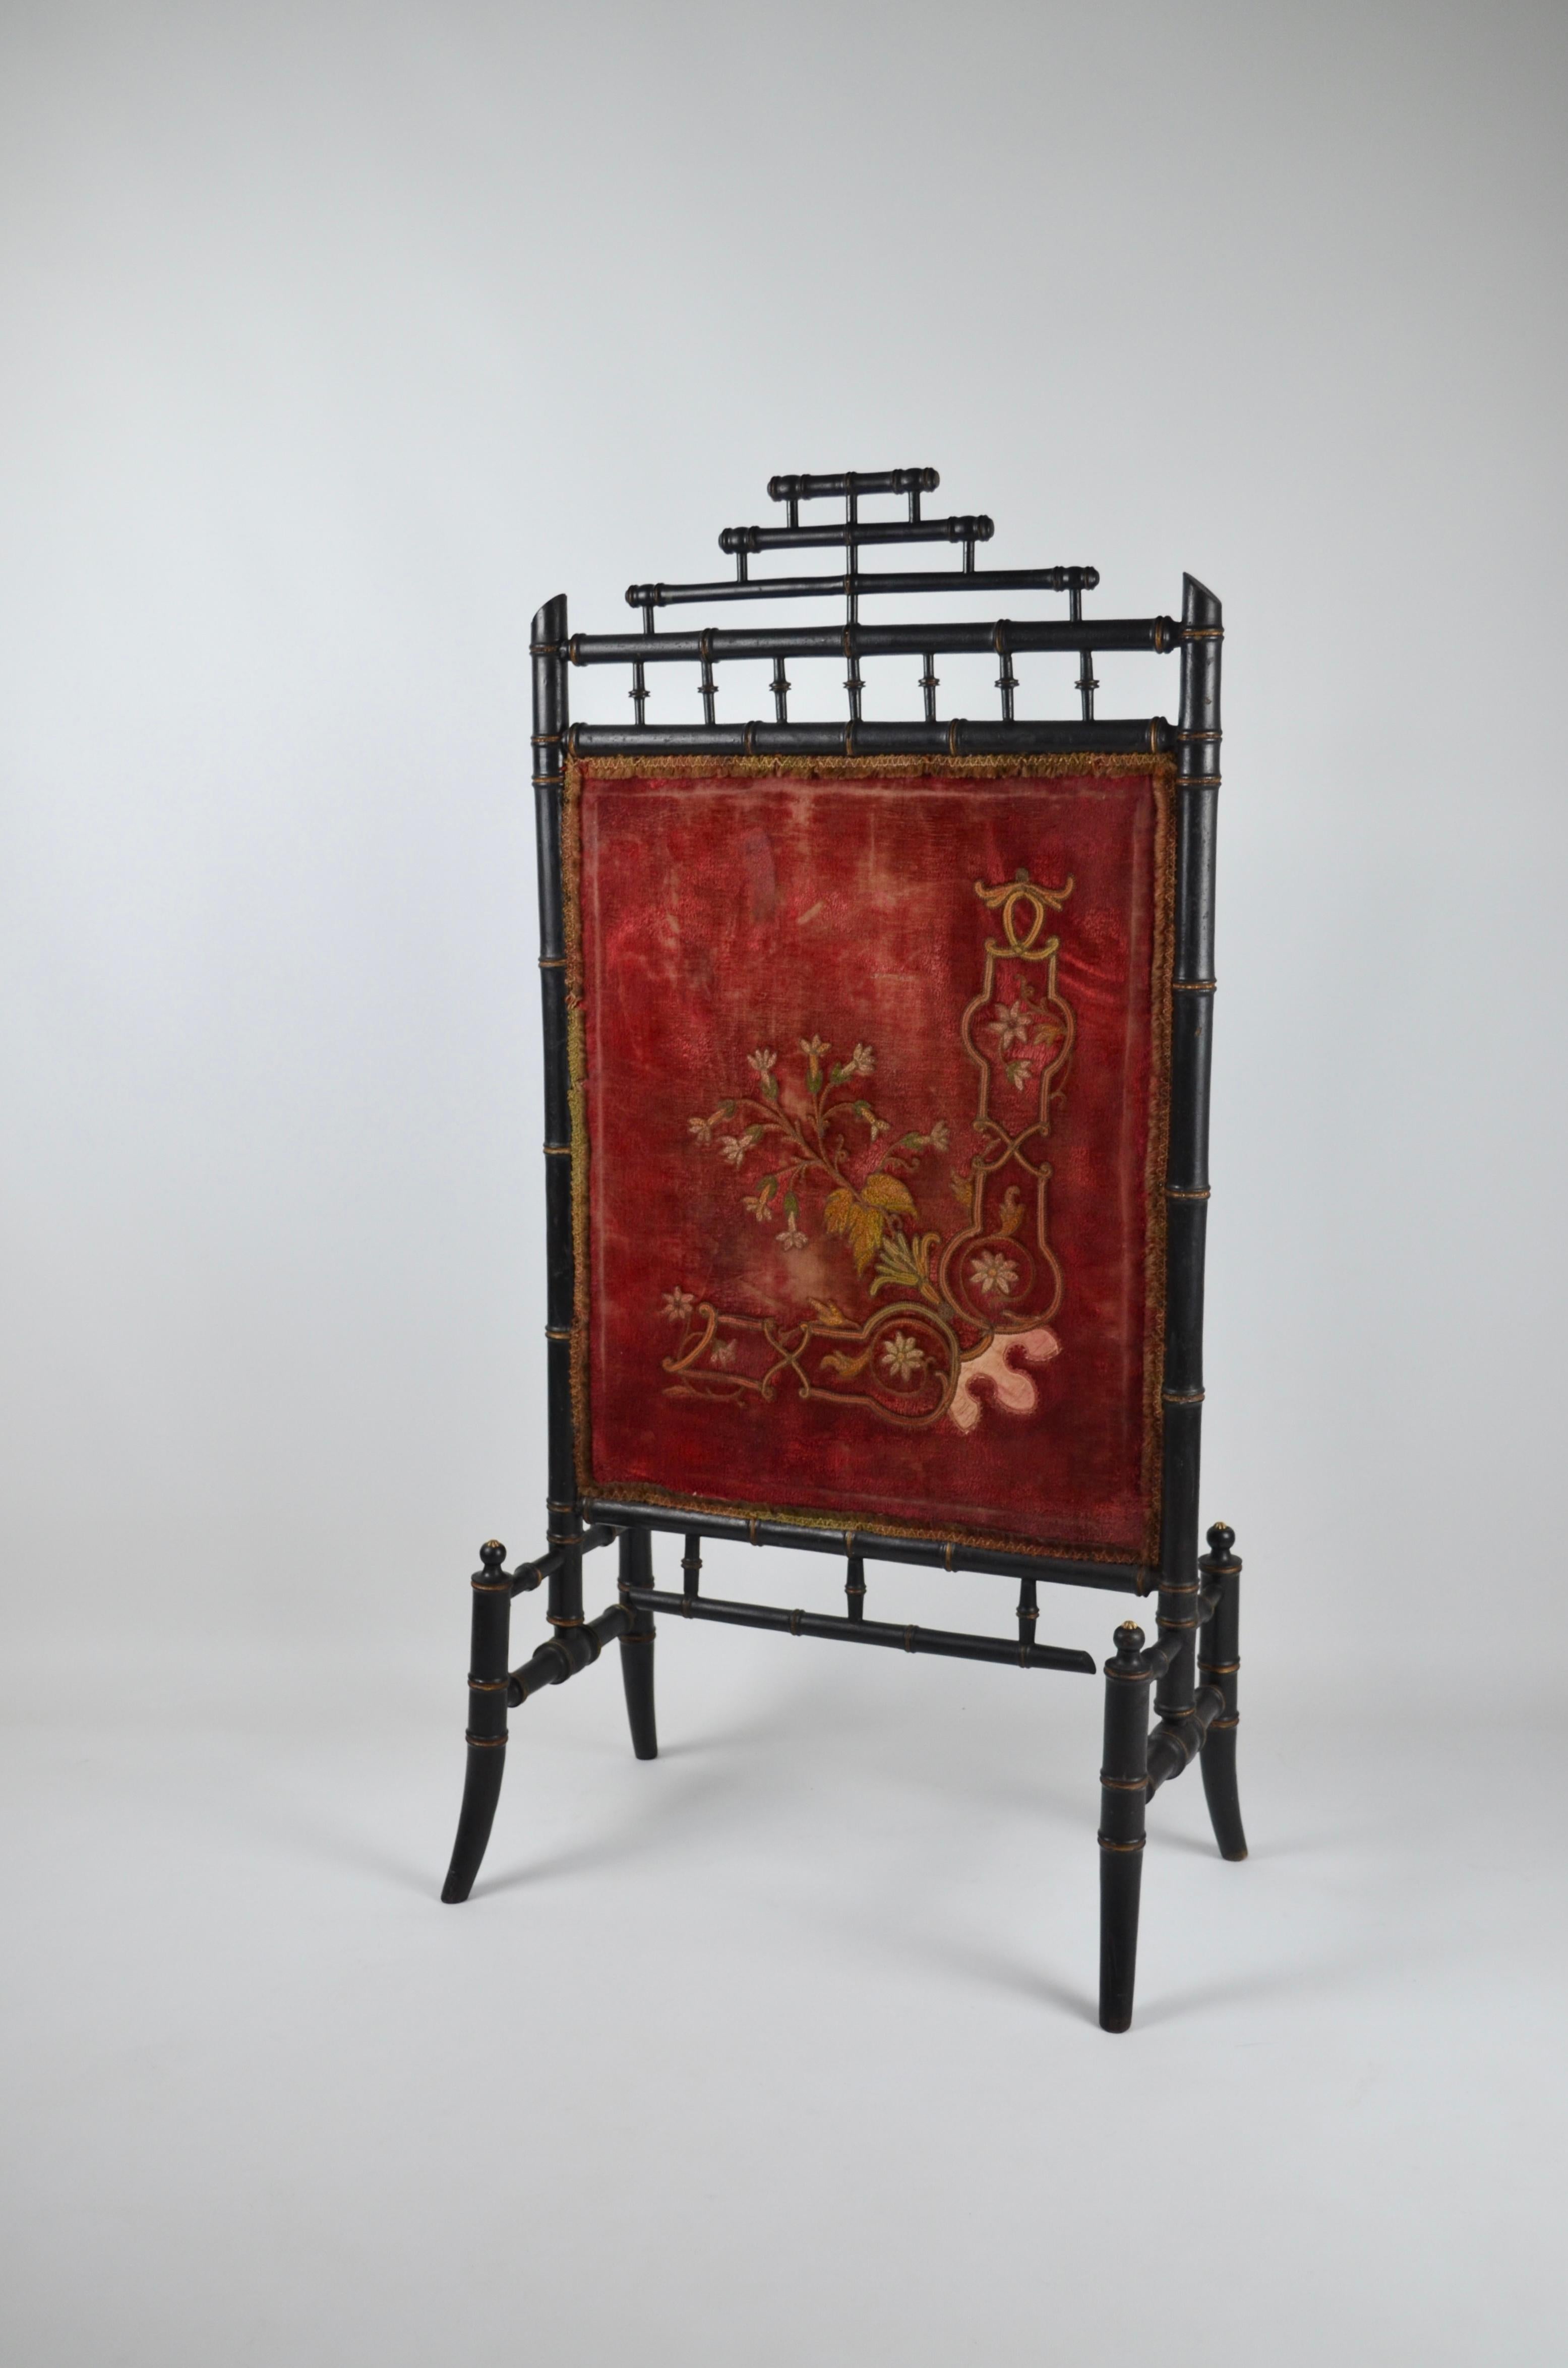 Antique French empire fireplace screen, made of wood, faux bamboo, second Empire period, France, 2nd half of the 19th century
It is in empire black color with touches of gold on the joints.
Elegant finishes with its brass flowers on the feet.
The